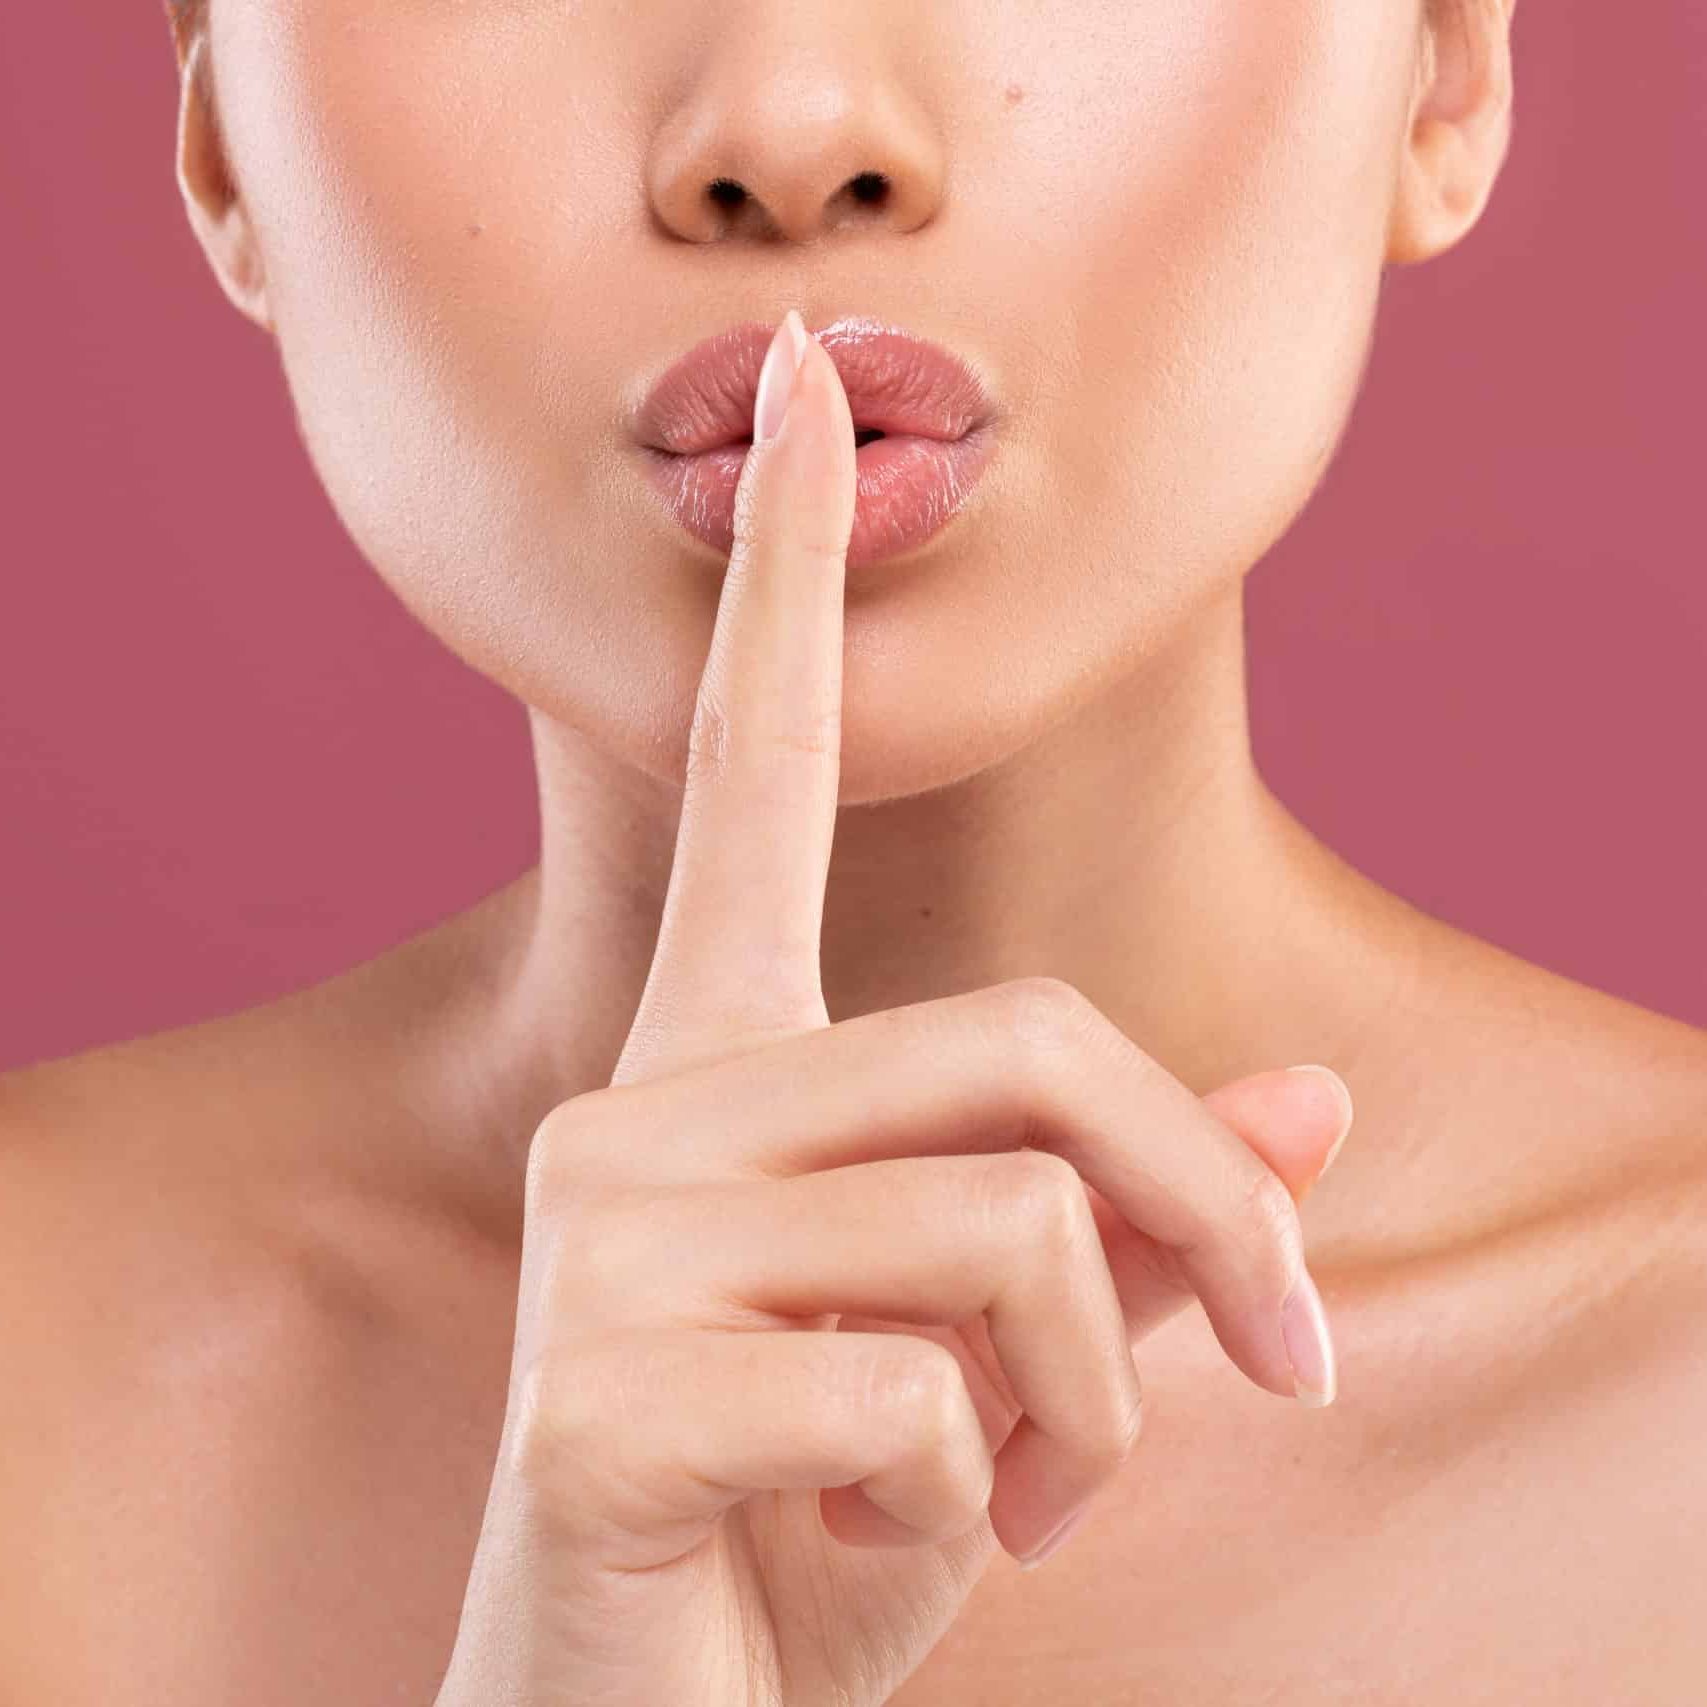 cropped of sexy naked woman showing silence gesture